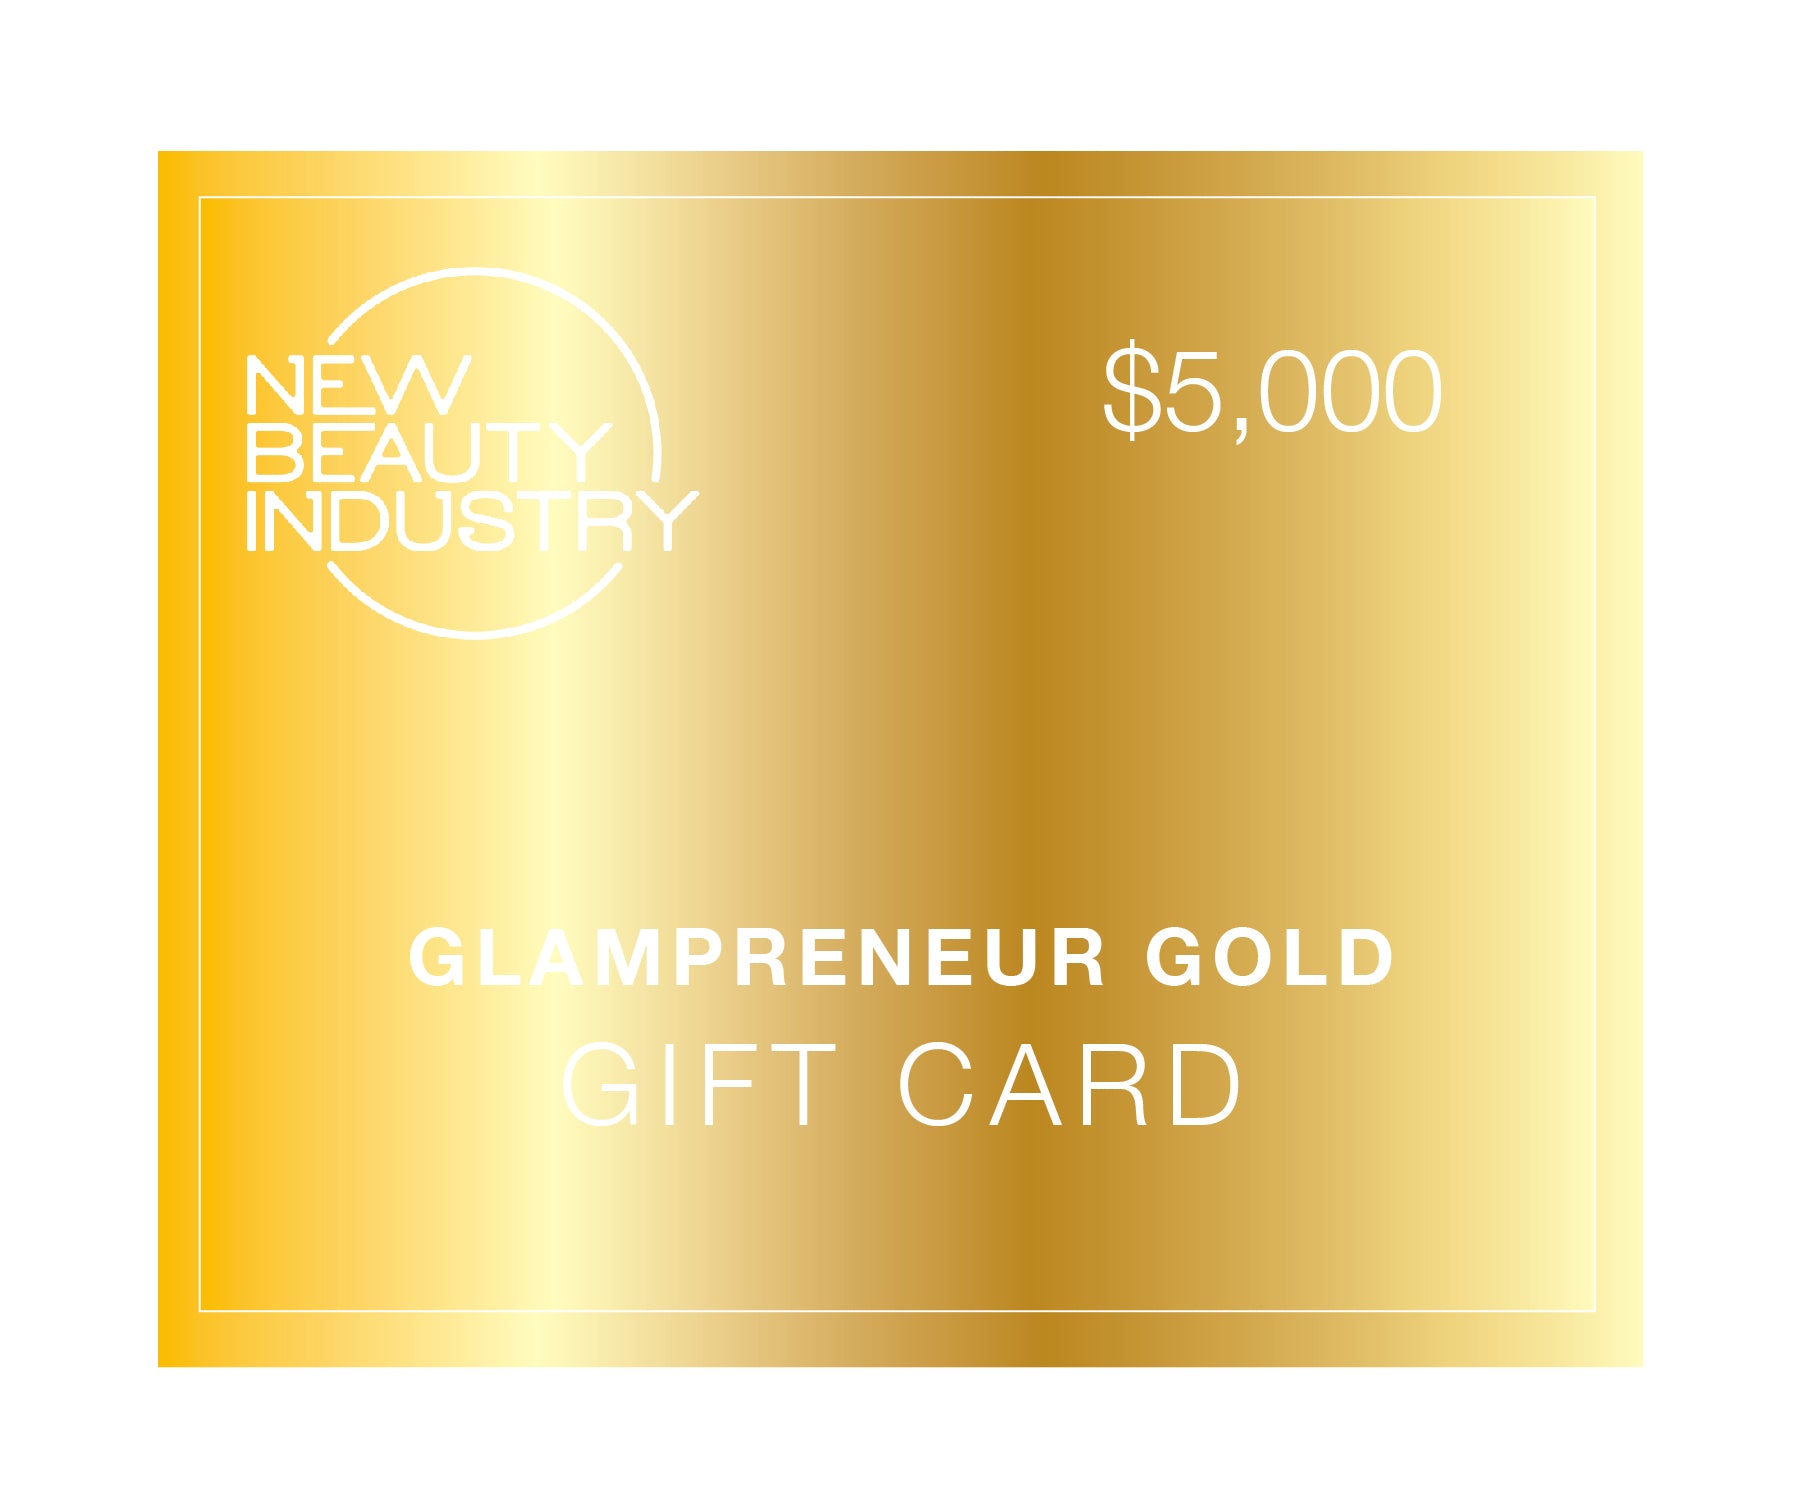 Glampreneur_Gold_Gift_card_New-Beauty_Industry